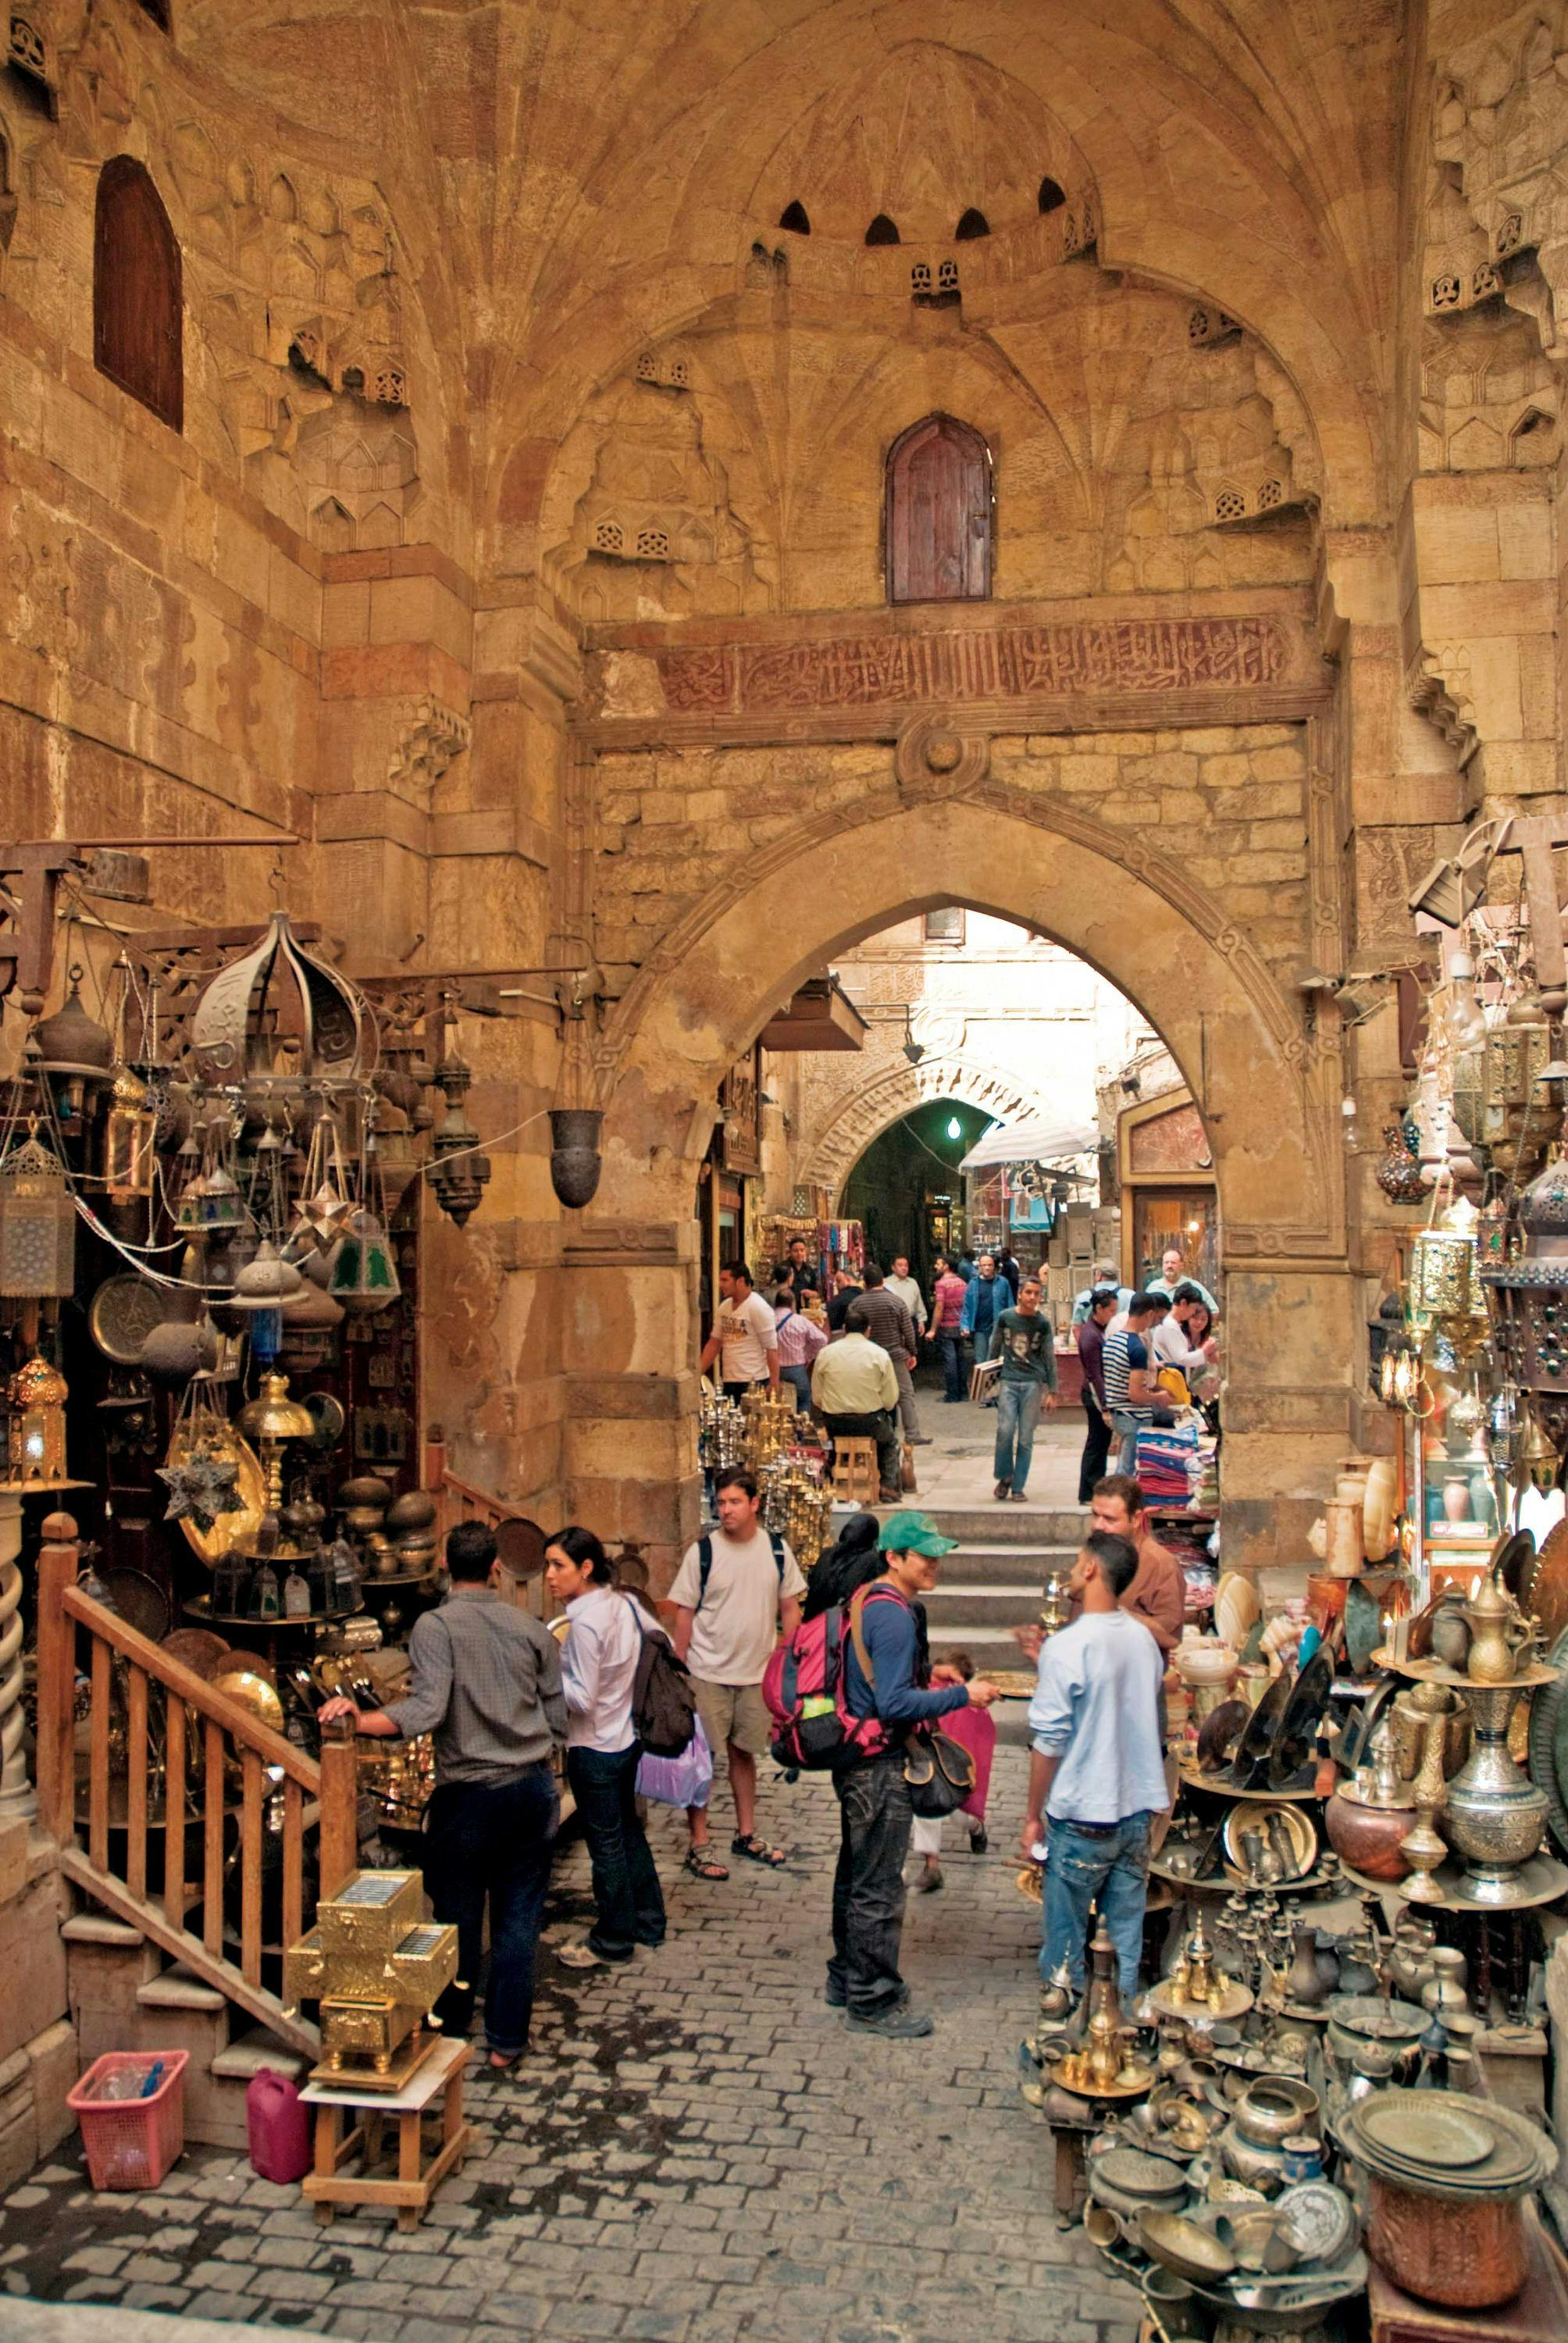 Guests explore Khan el-Khalili the famous bazaar and souq in the historic center of Cairo, Egypt.